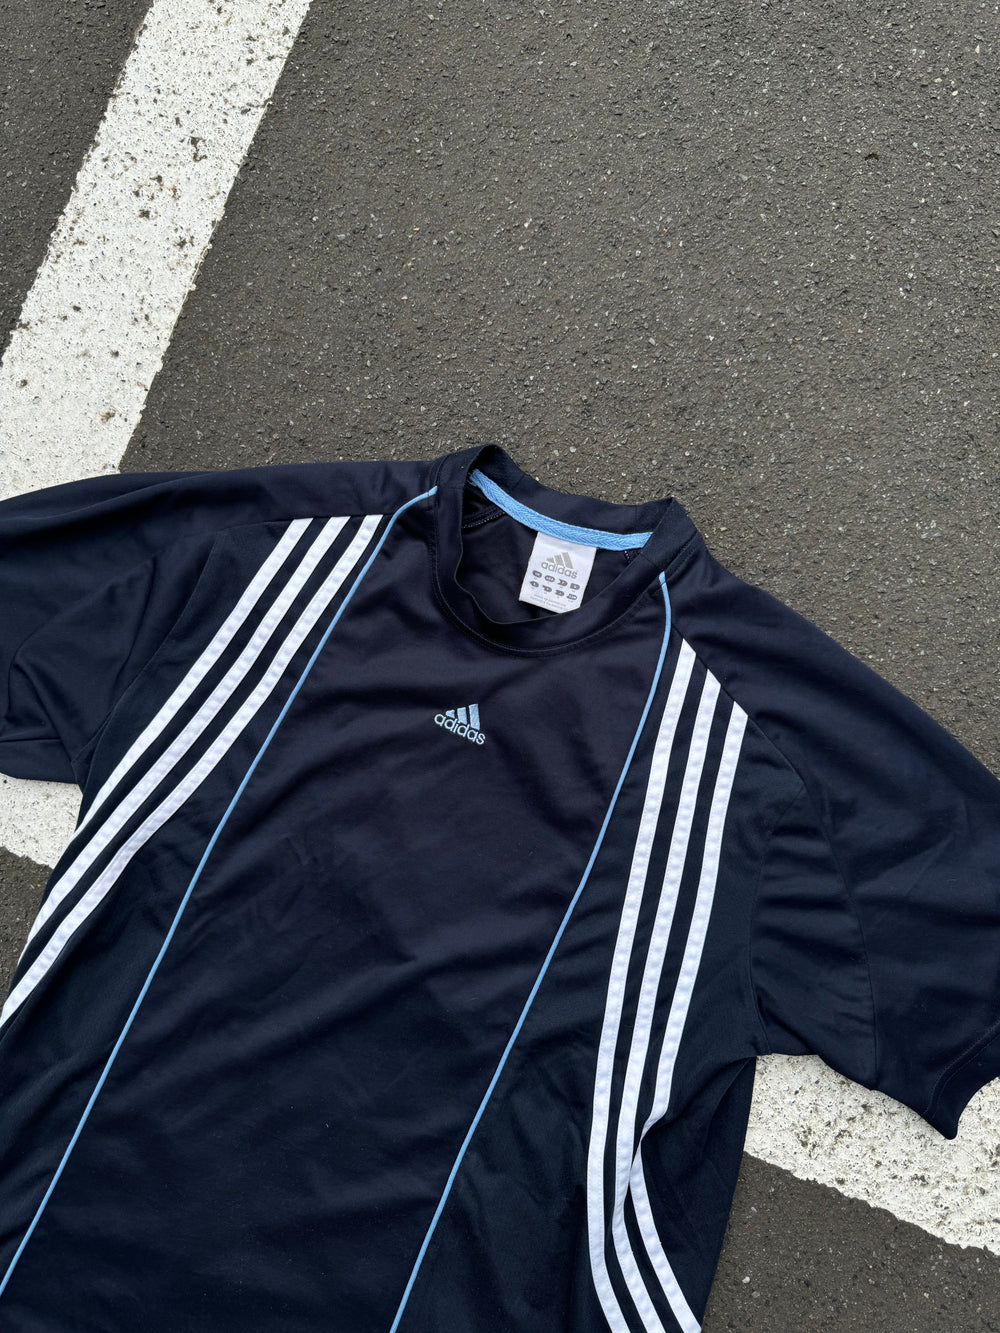 Early 2000s Adidas Climacool T-Shirt Jersey (M)